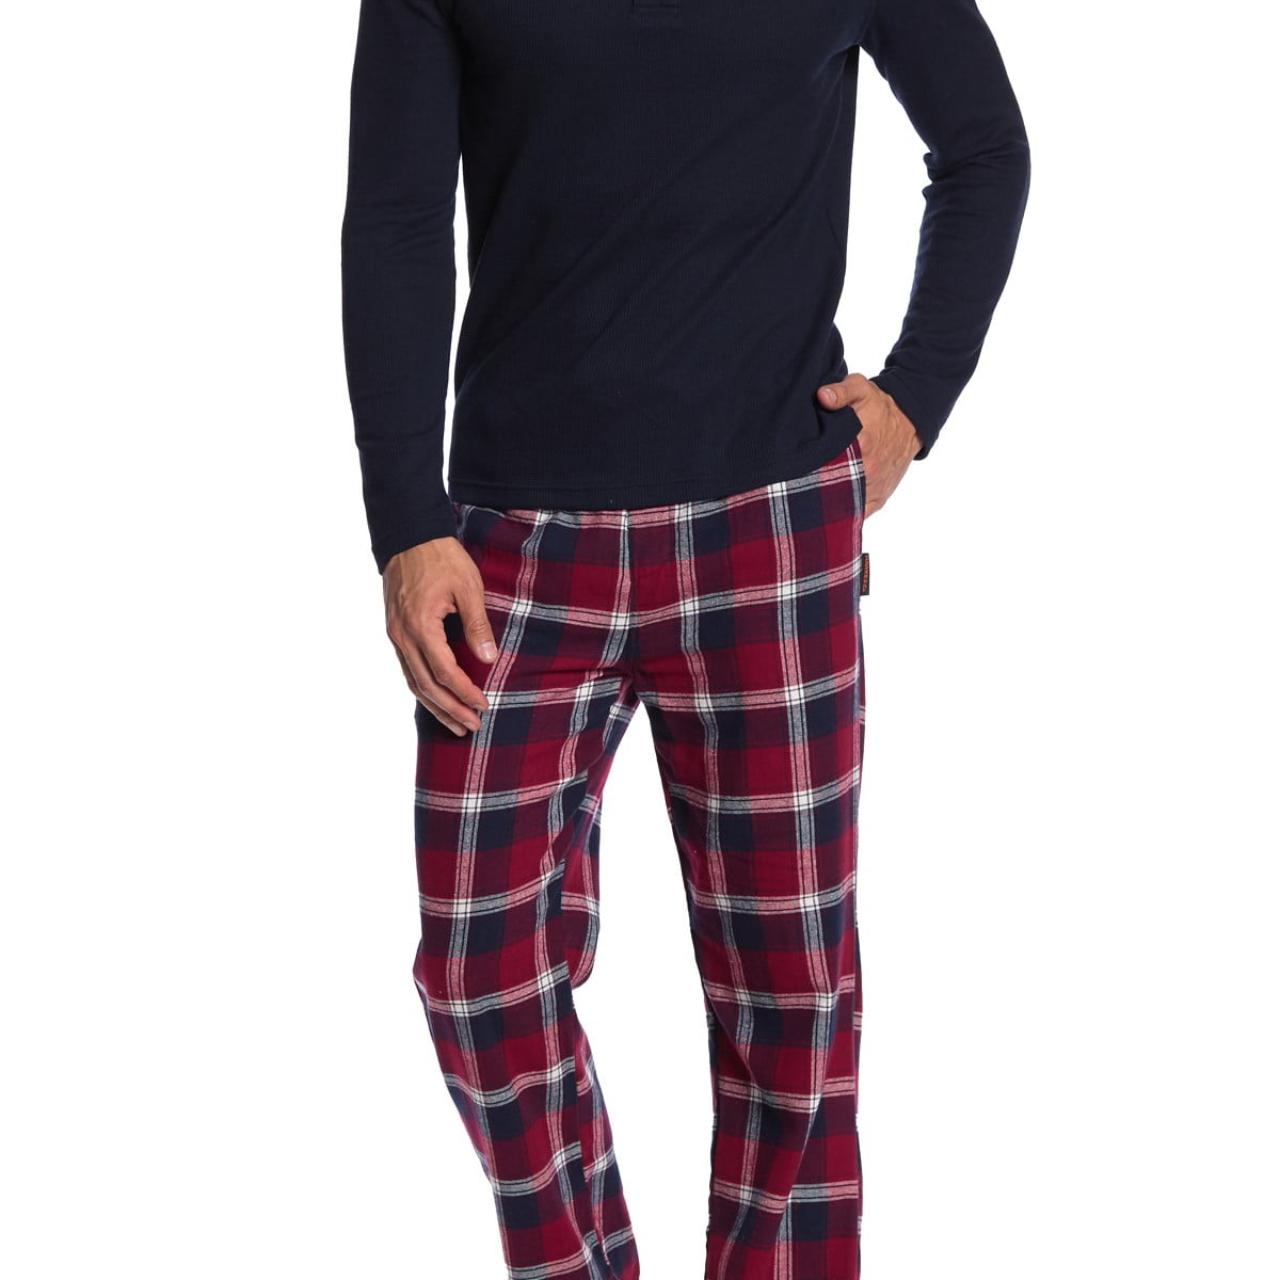 Hawke & Co. Men's Navy and Red Pajamas (2)